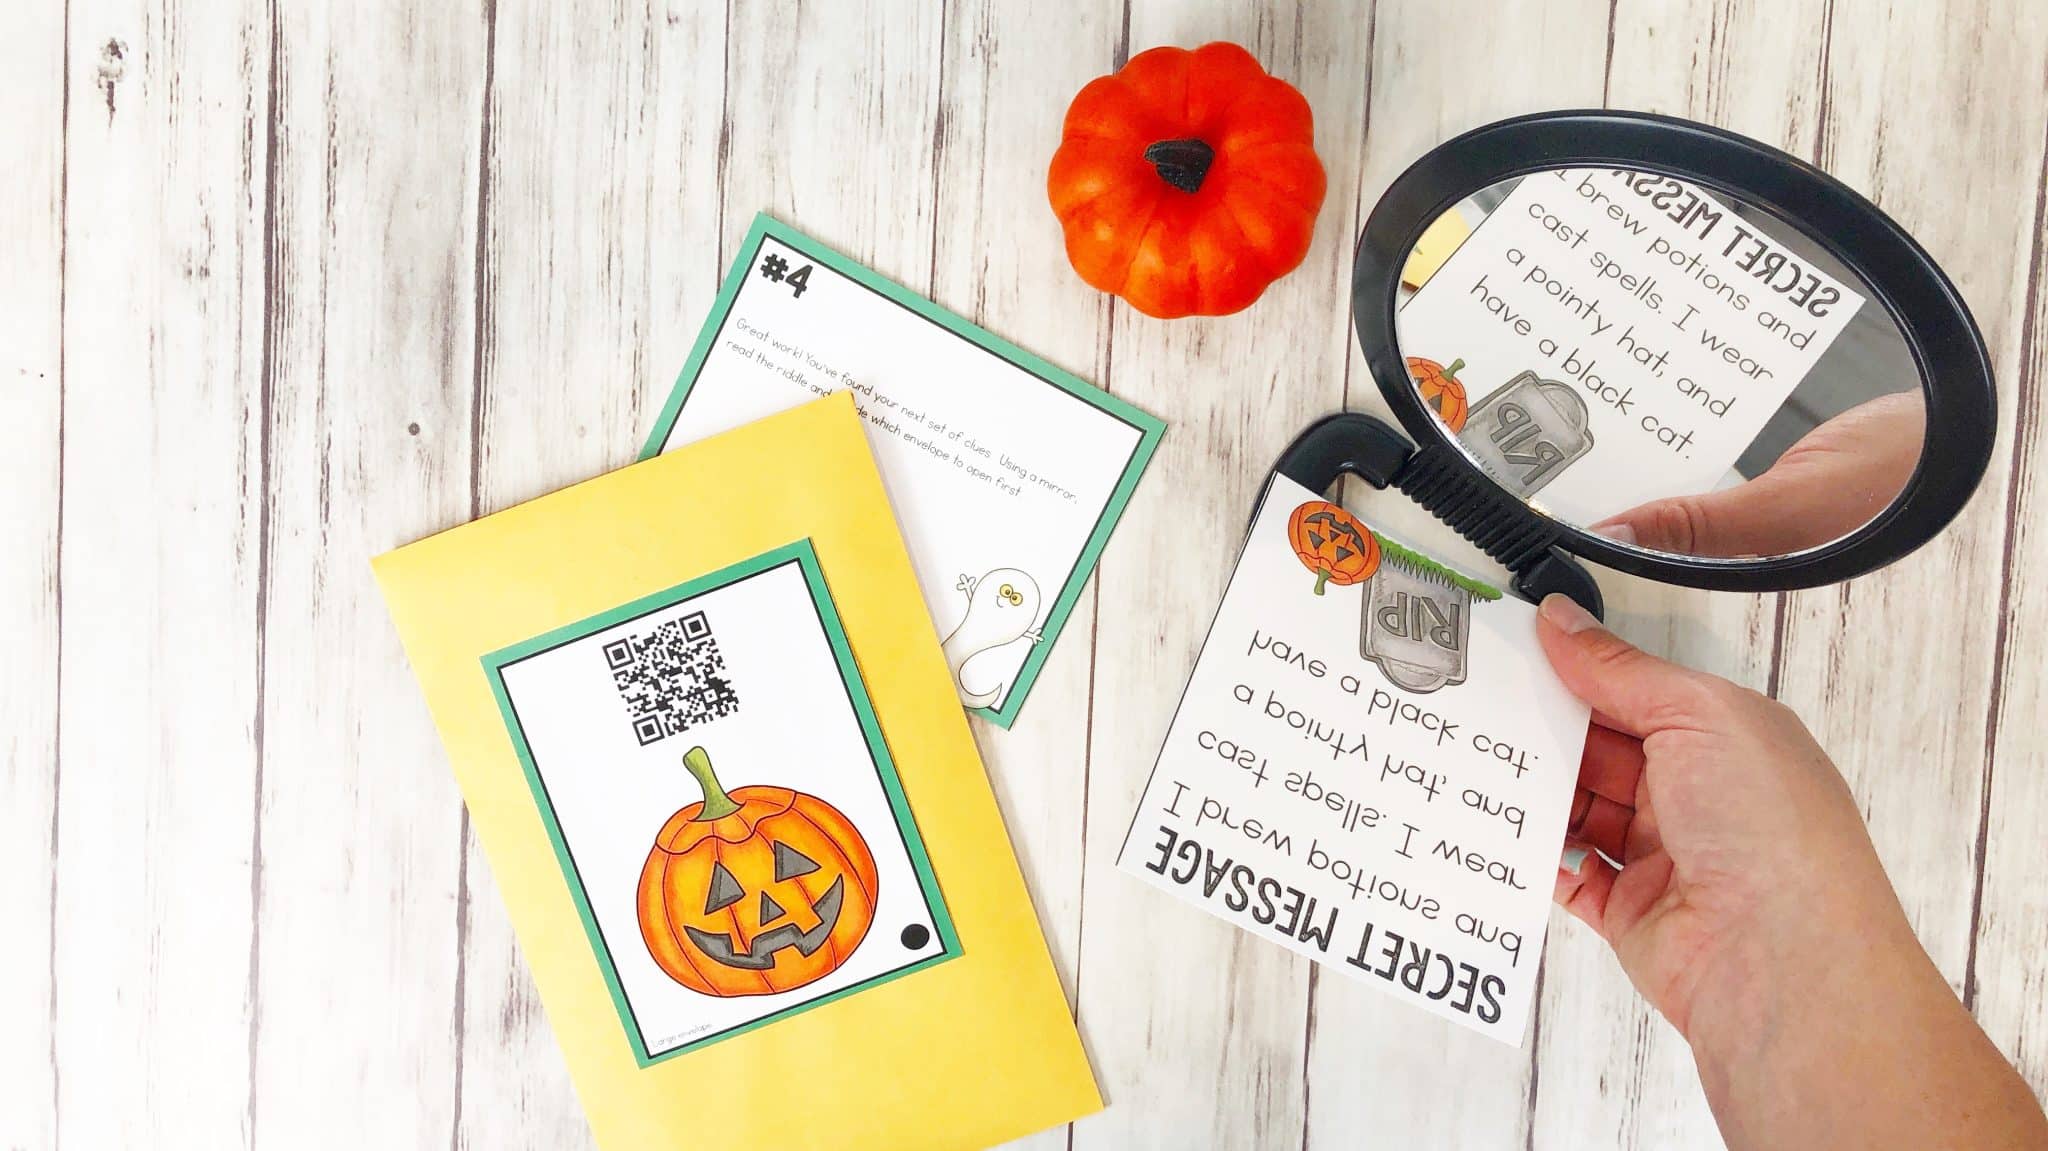 Halloween pumpkin printable: A spooky pumpkin template for Halloween decorations. Get creative with this printable design